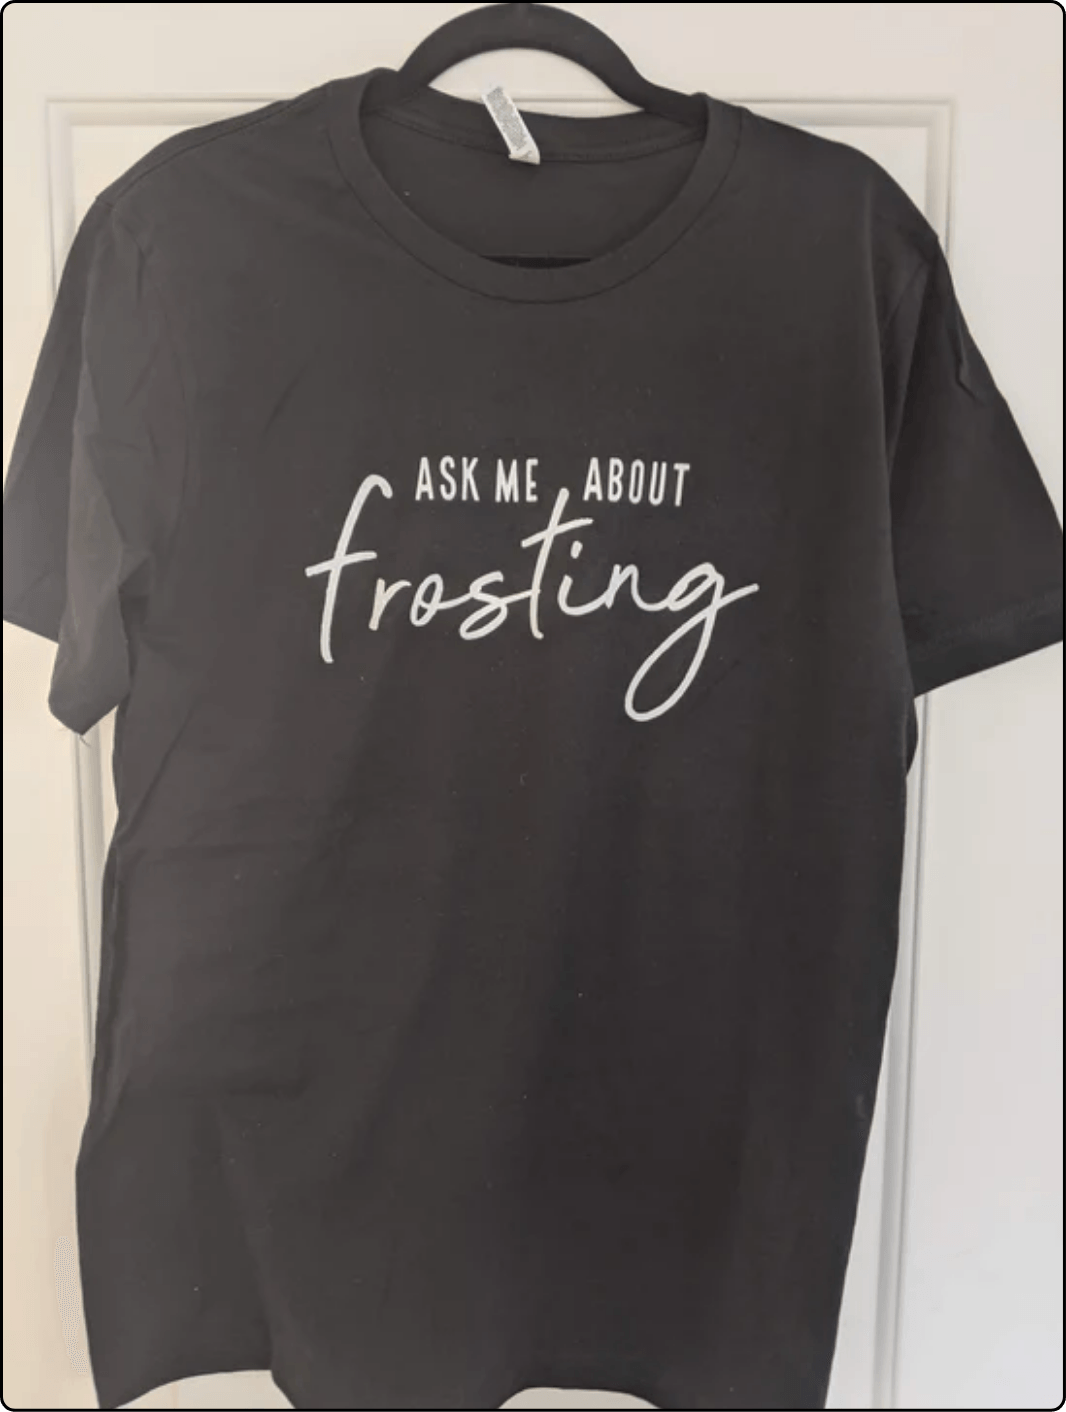 “Ask Me About Frosting” t-shirt